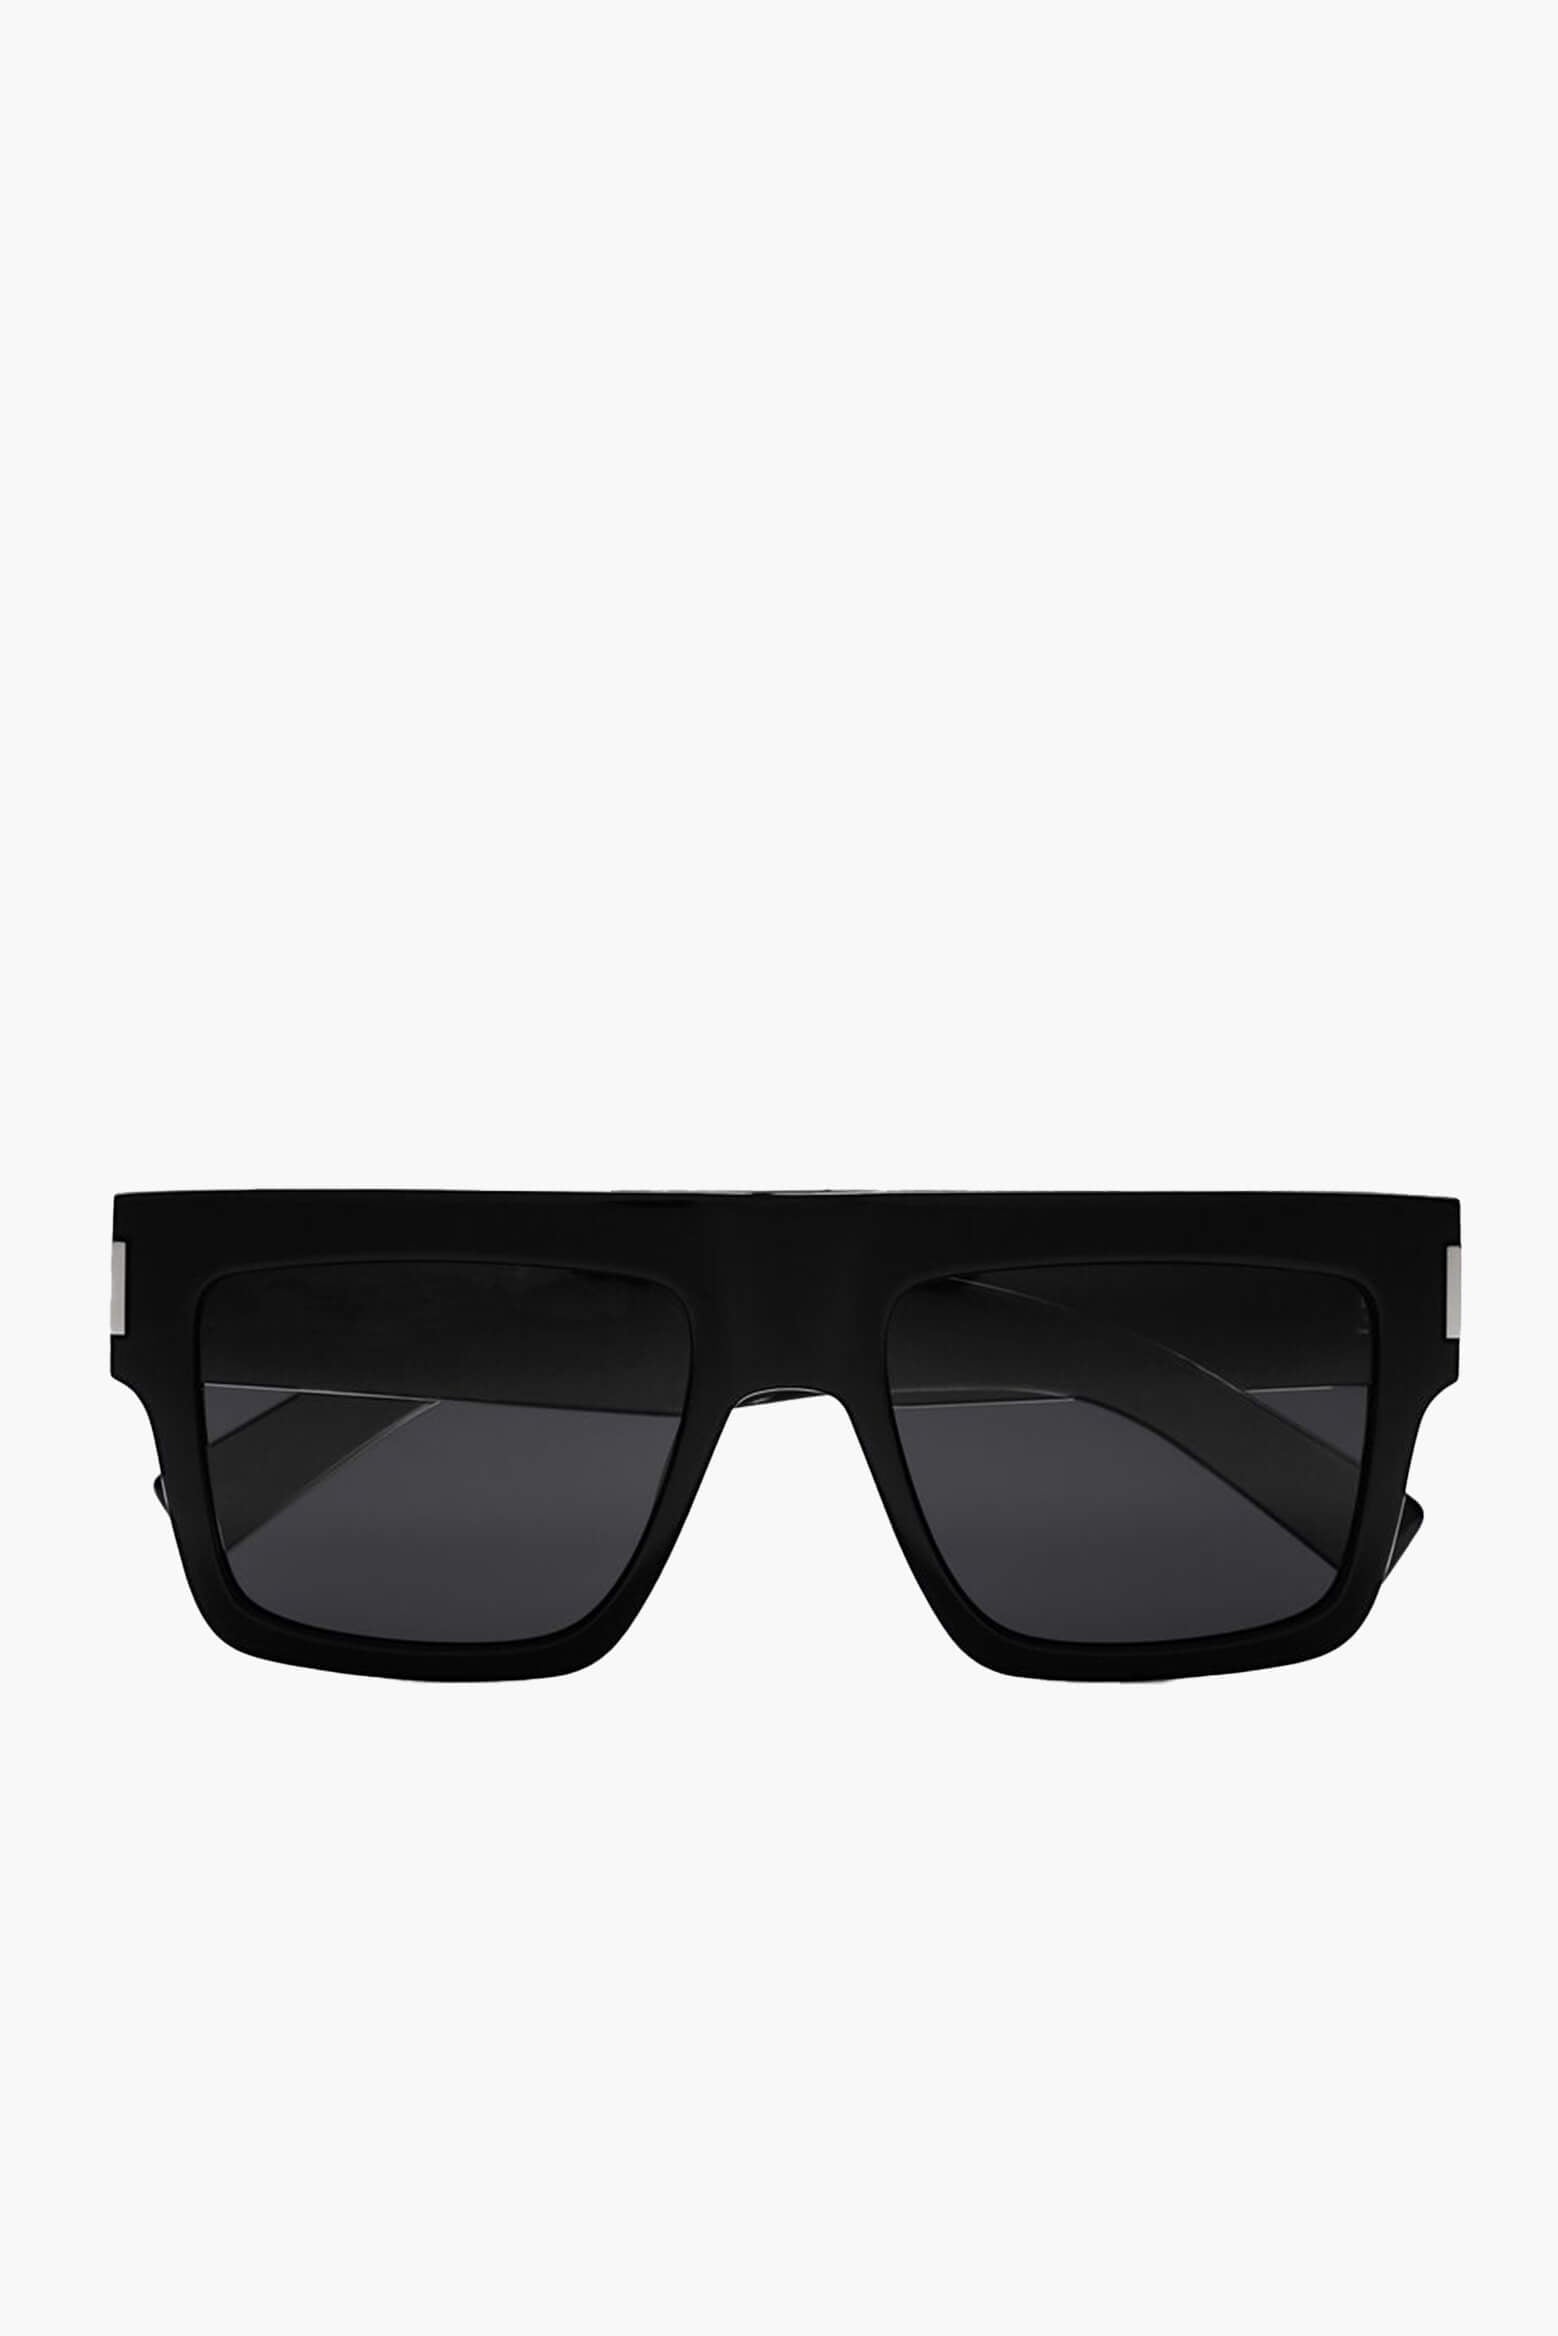 Saint Laurent Flat-Top Thick Square Sunglasses available at The New Trend Australia.